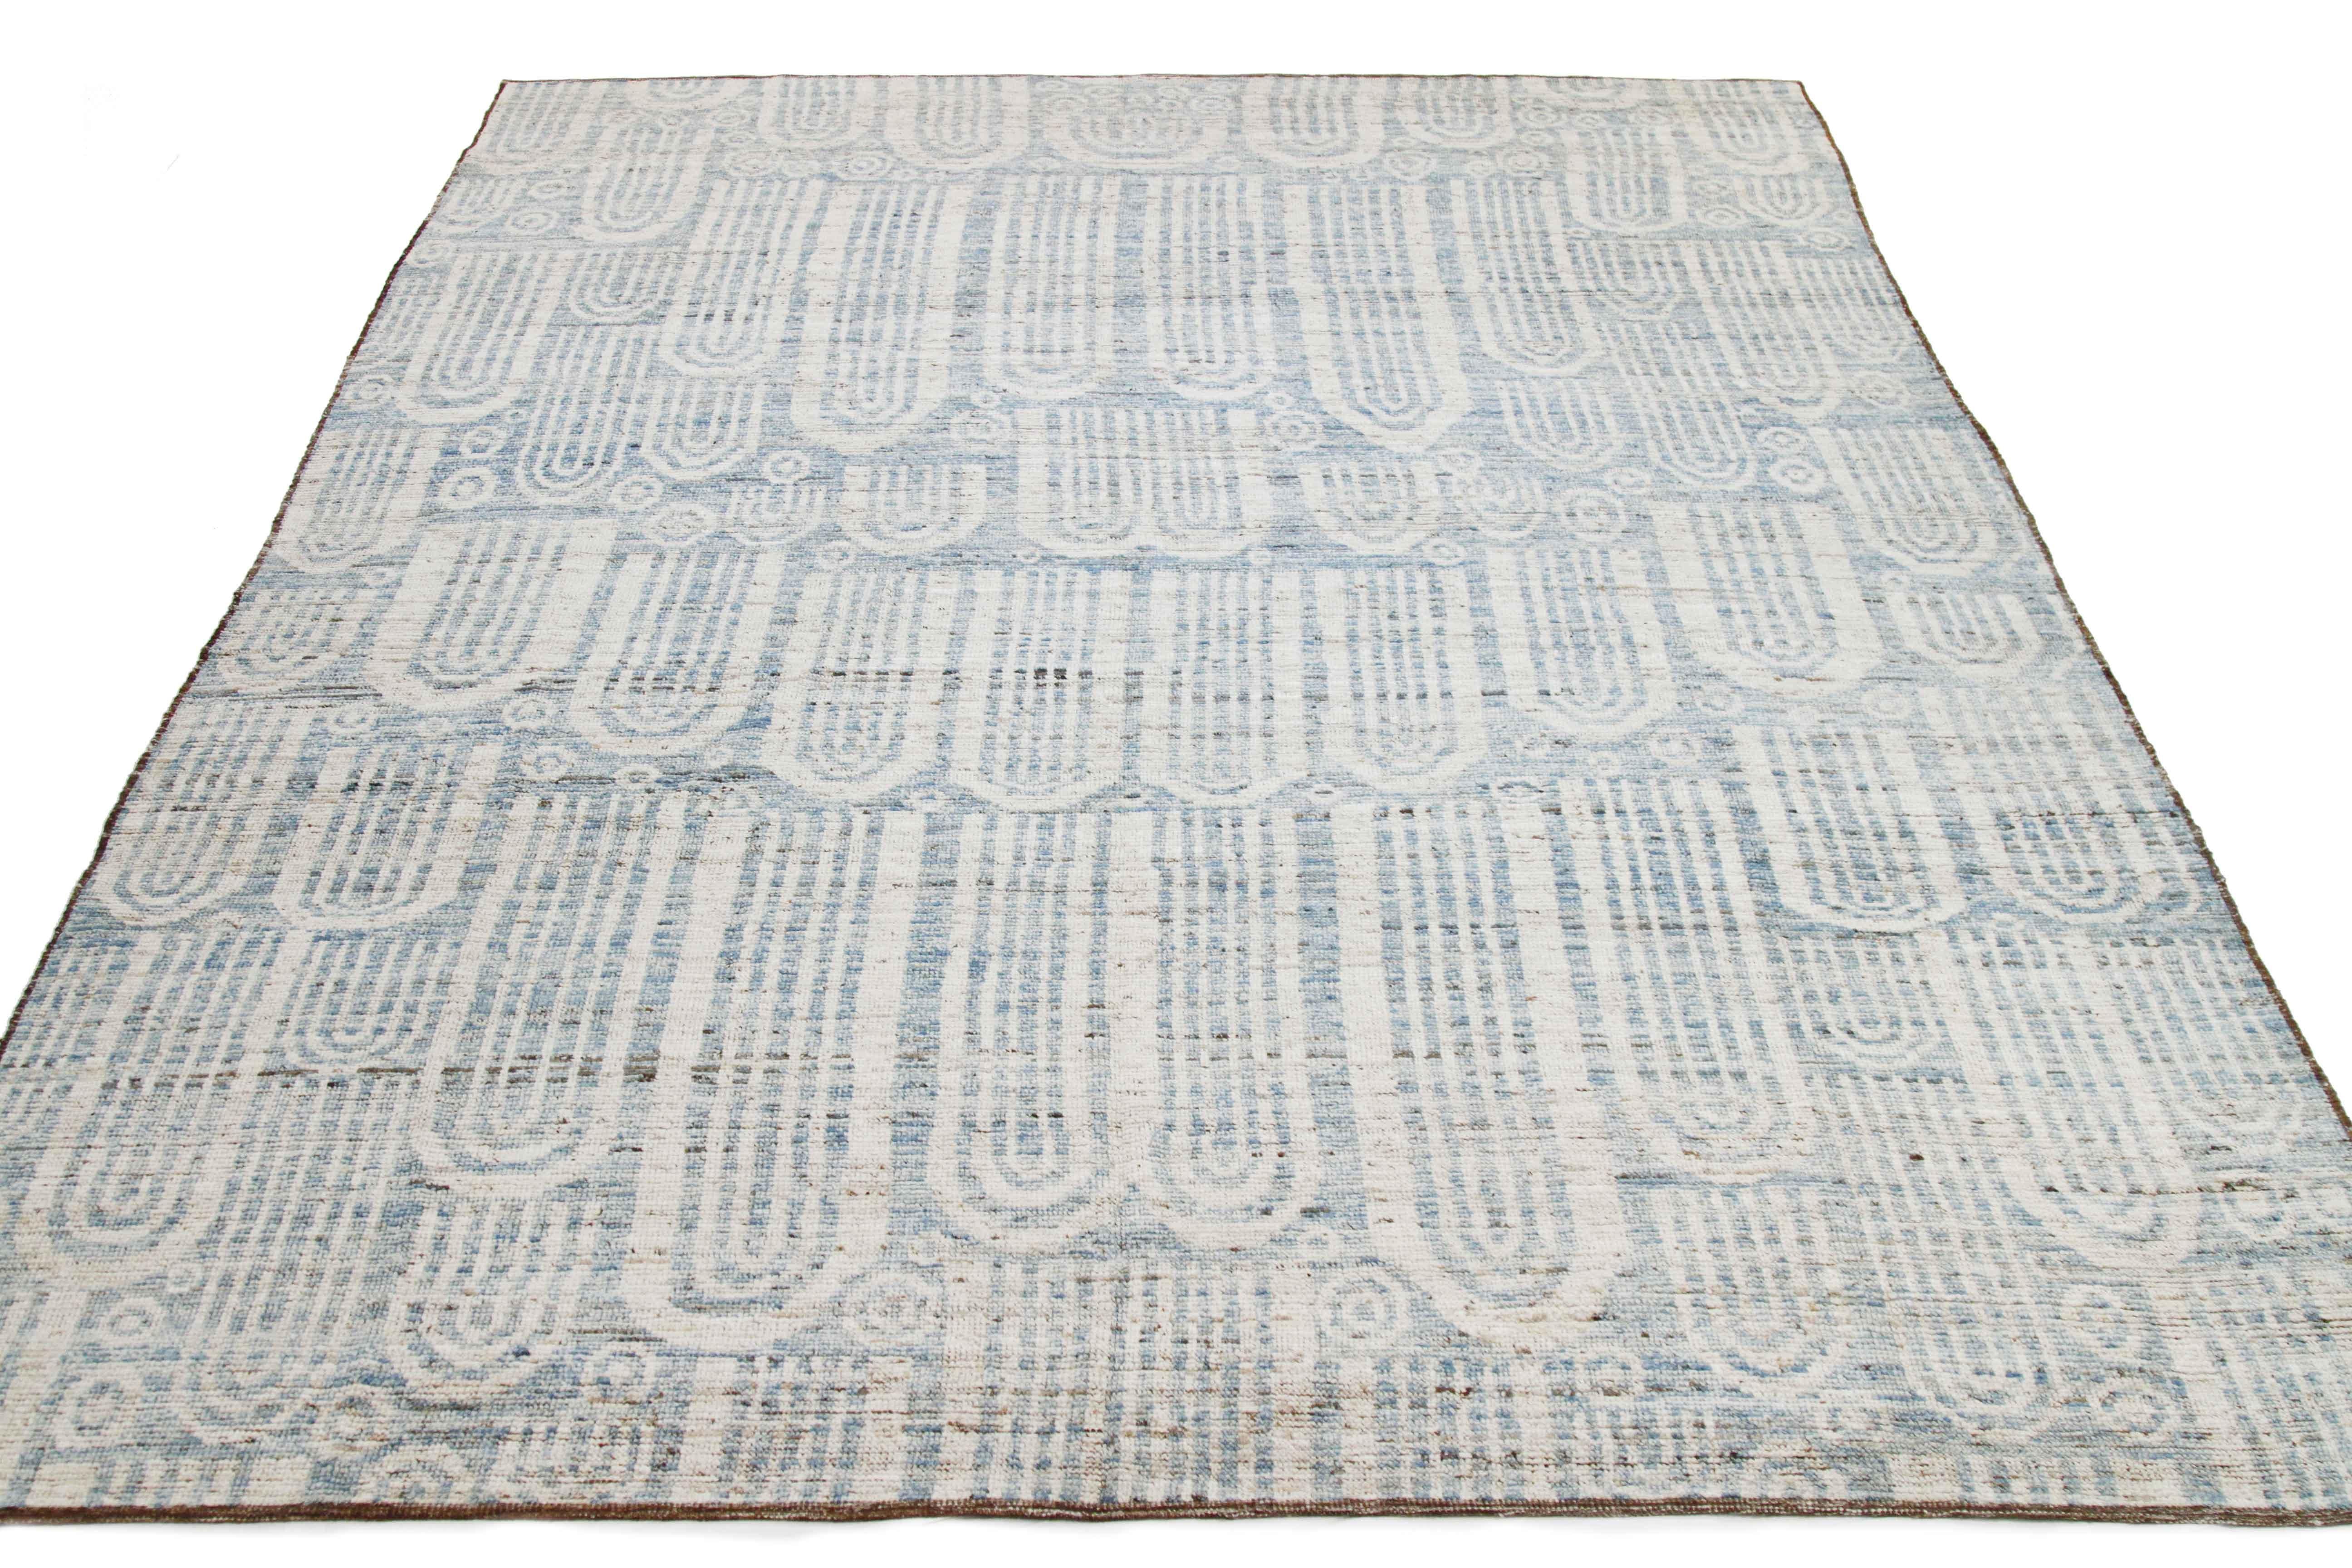 Modern Afghan rug handwoven from the finest sheep’s wool and colored with all-natural vegetable dyes that are safe for humans and pets. It’s a traditional Afghan weaving featuring a Moroccan inspired design highlighted by blue tribal patterns over